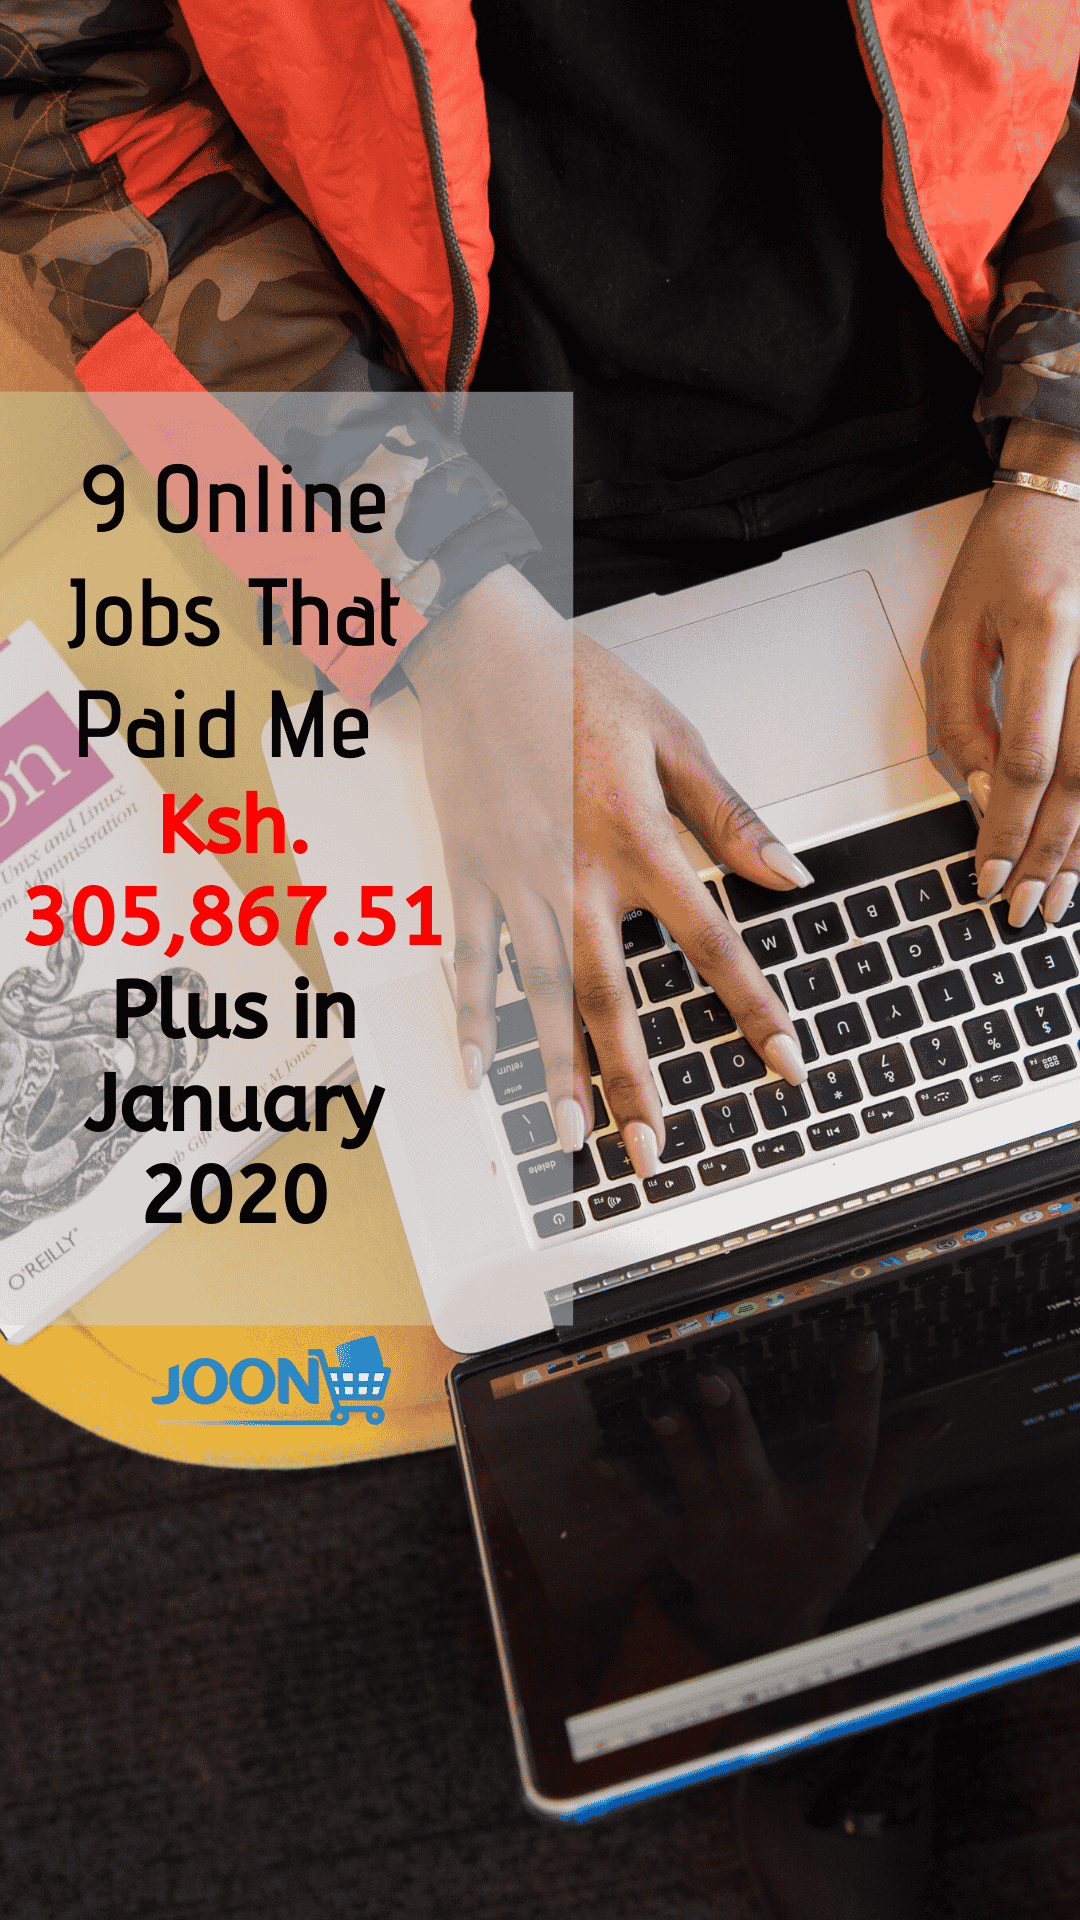 9 Online Jobs That Paid Me Ksh. 305,867.51 Plus in January 2020